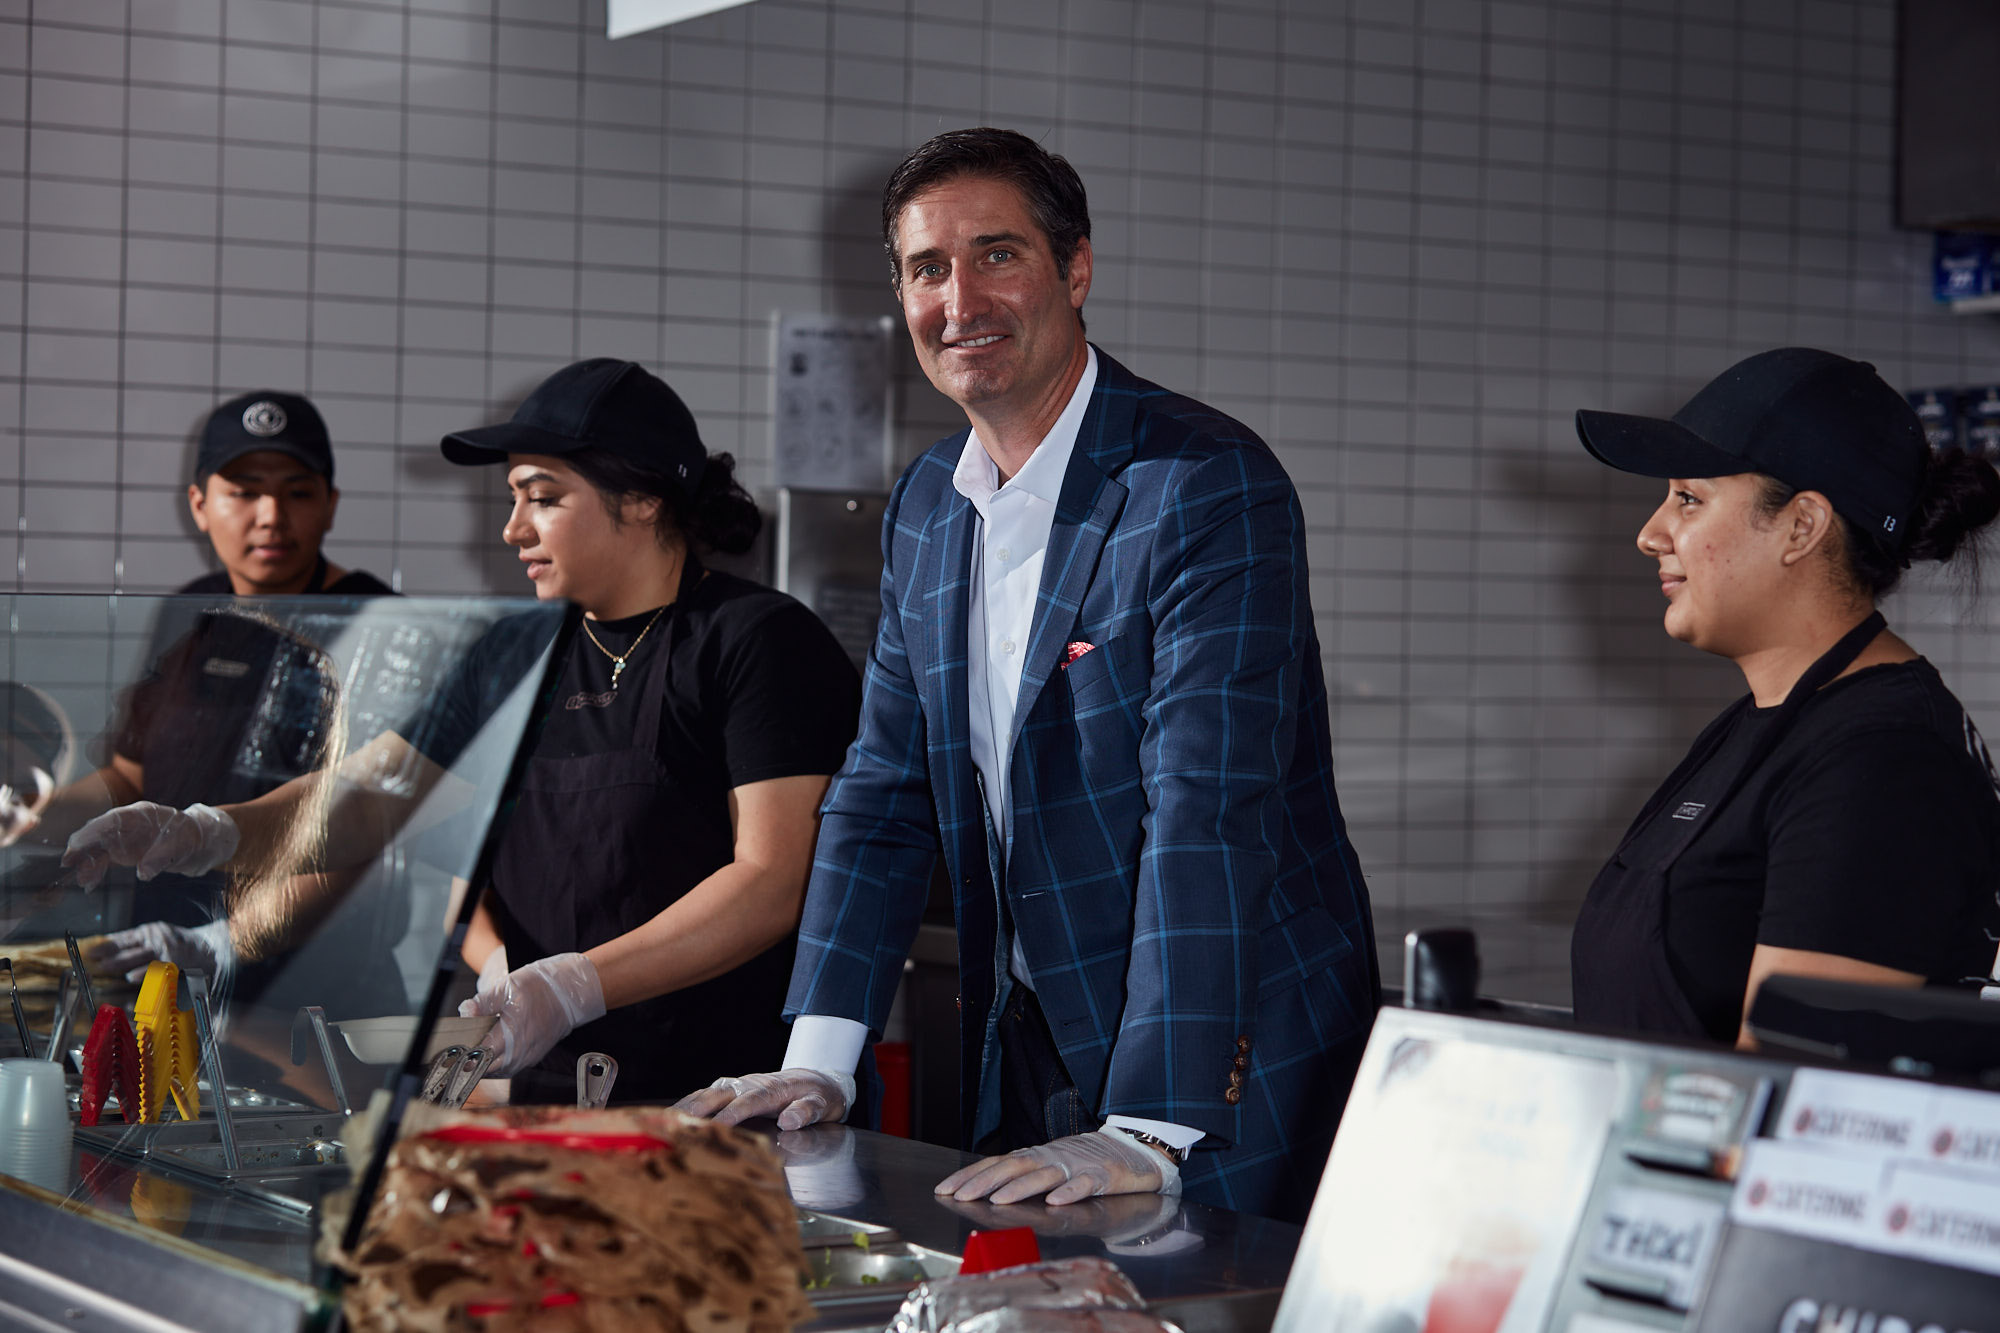 181026_CHIPOTLE_TIME_MAG_02-0620